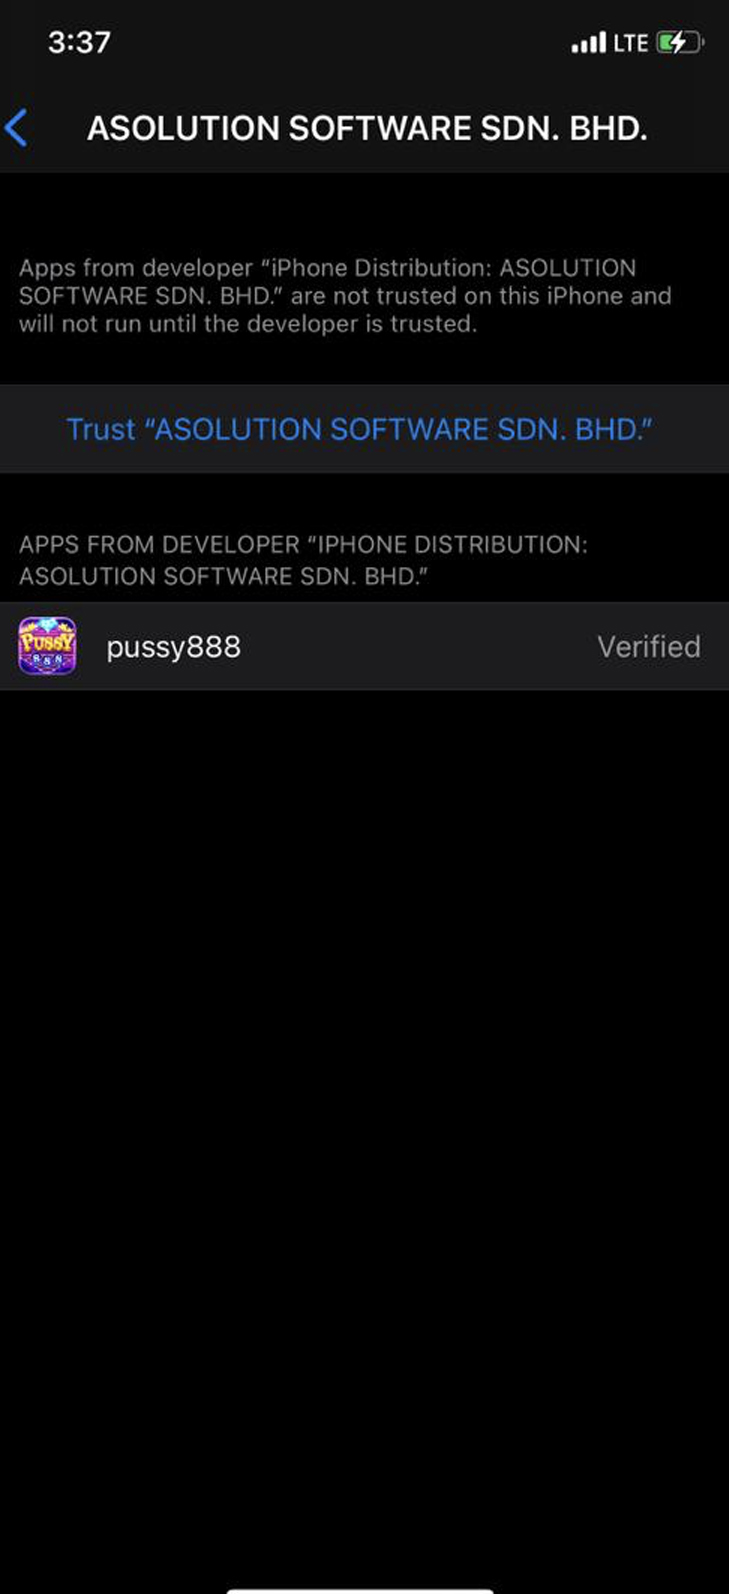 Pussy888-IOS-installation-guide5